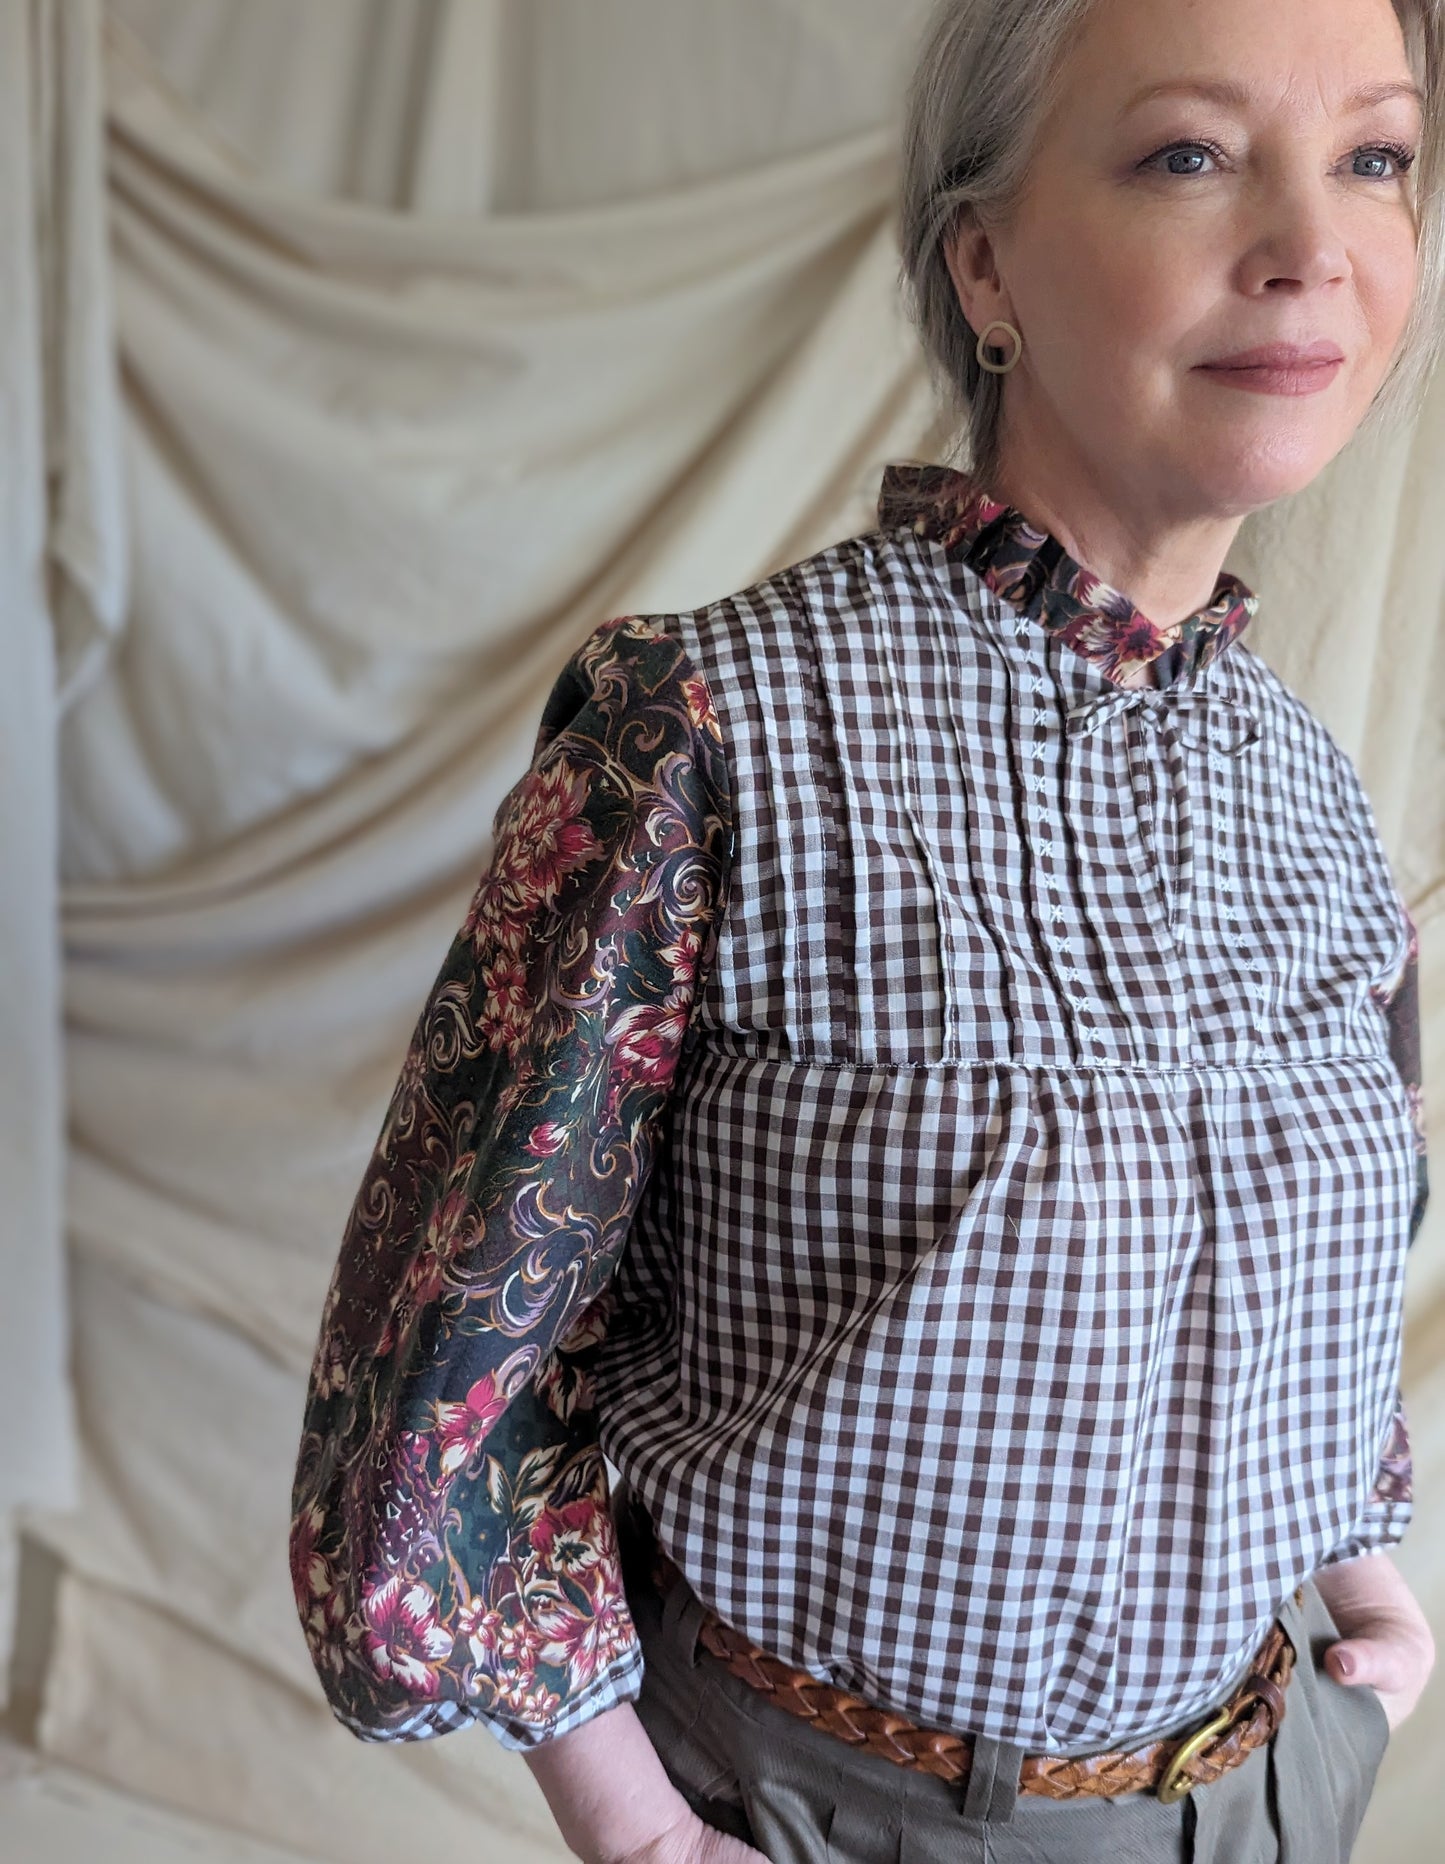 Meg Top with Upcycled & Vintage Embroidered Gingham Fabrics M/L #MEGTO17